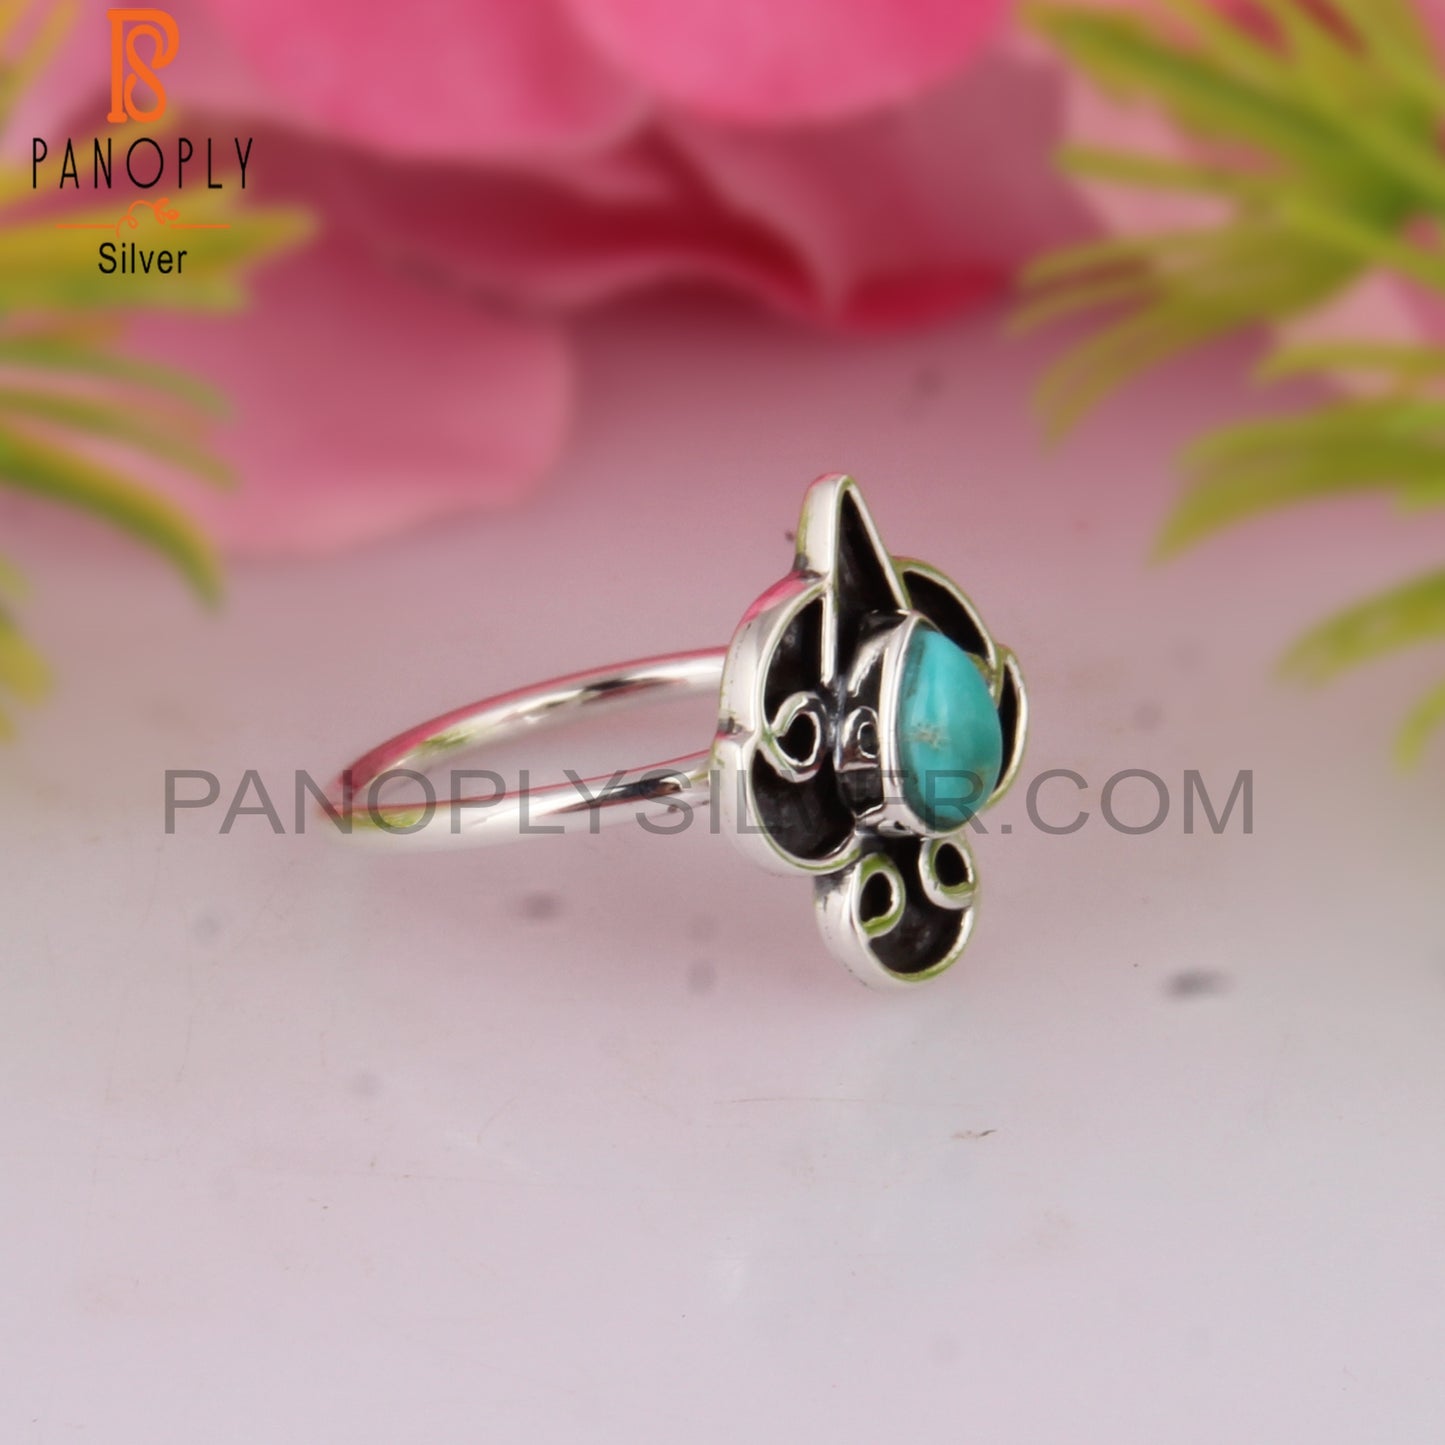 Casual Arizona Turquoise Pear Shape 925 Sterling Silver Ring